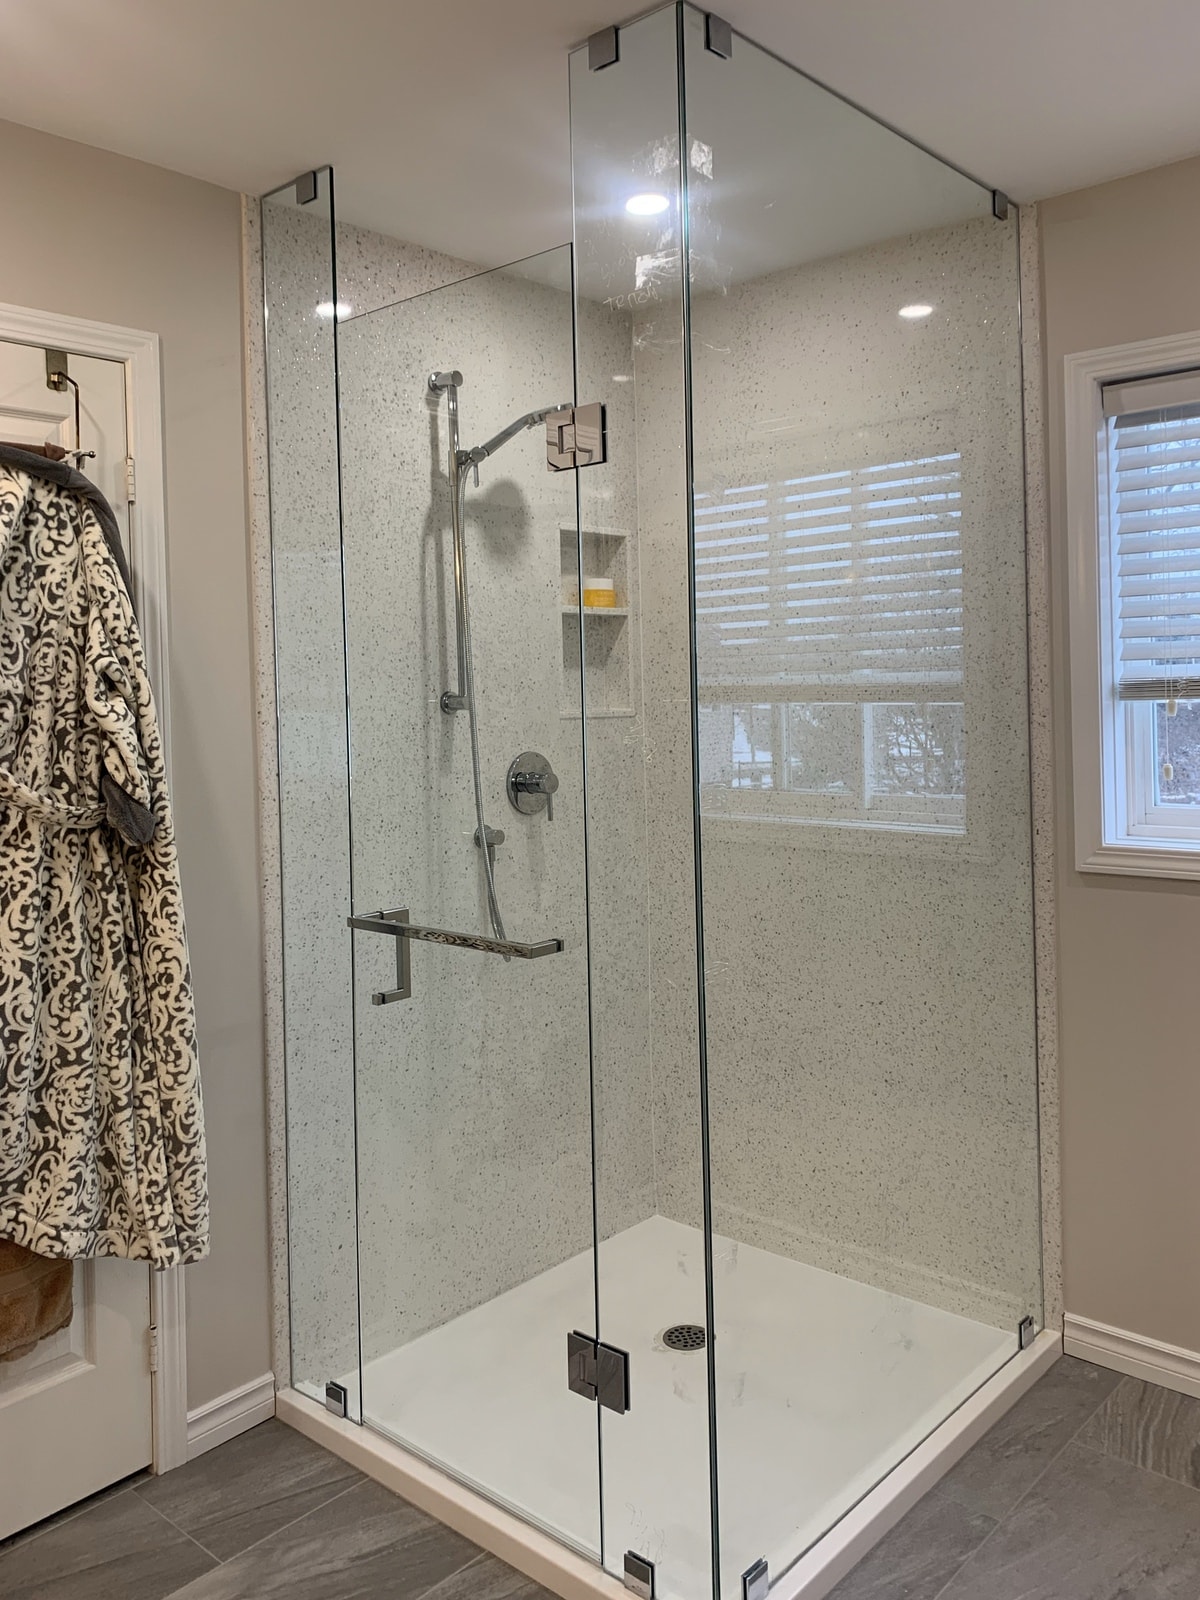 Complete with plumbing fixtures & frameless shower glass.